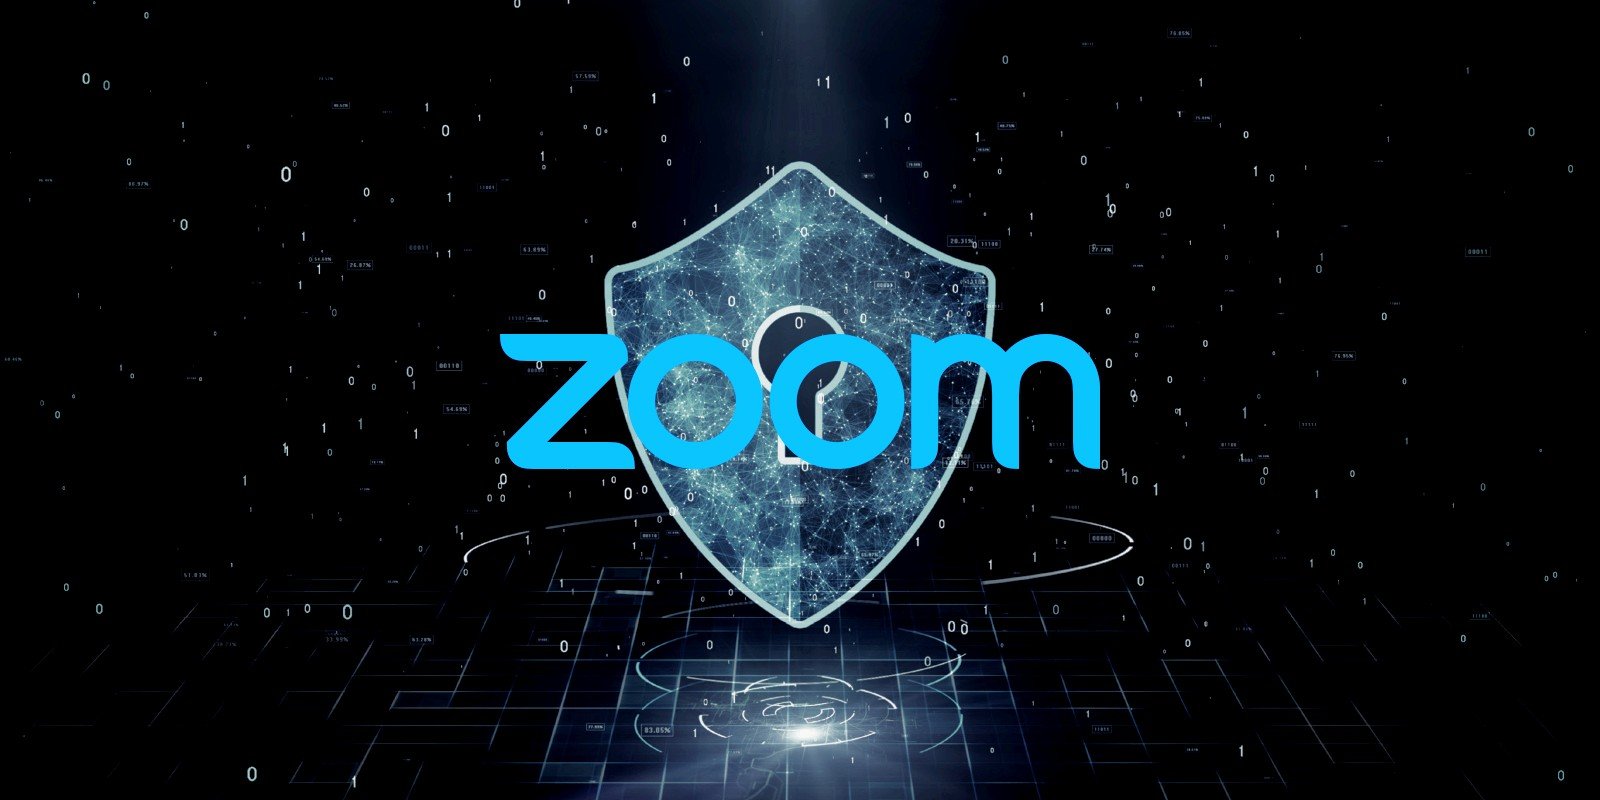 Zoom patches critical privilege elevation flaw in Windows apps